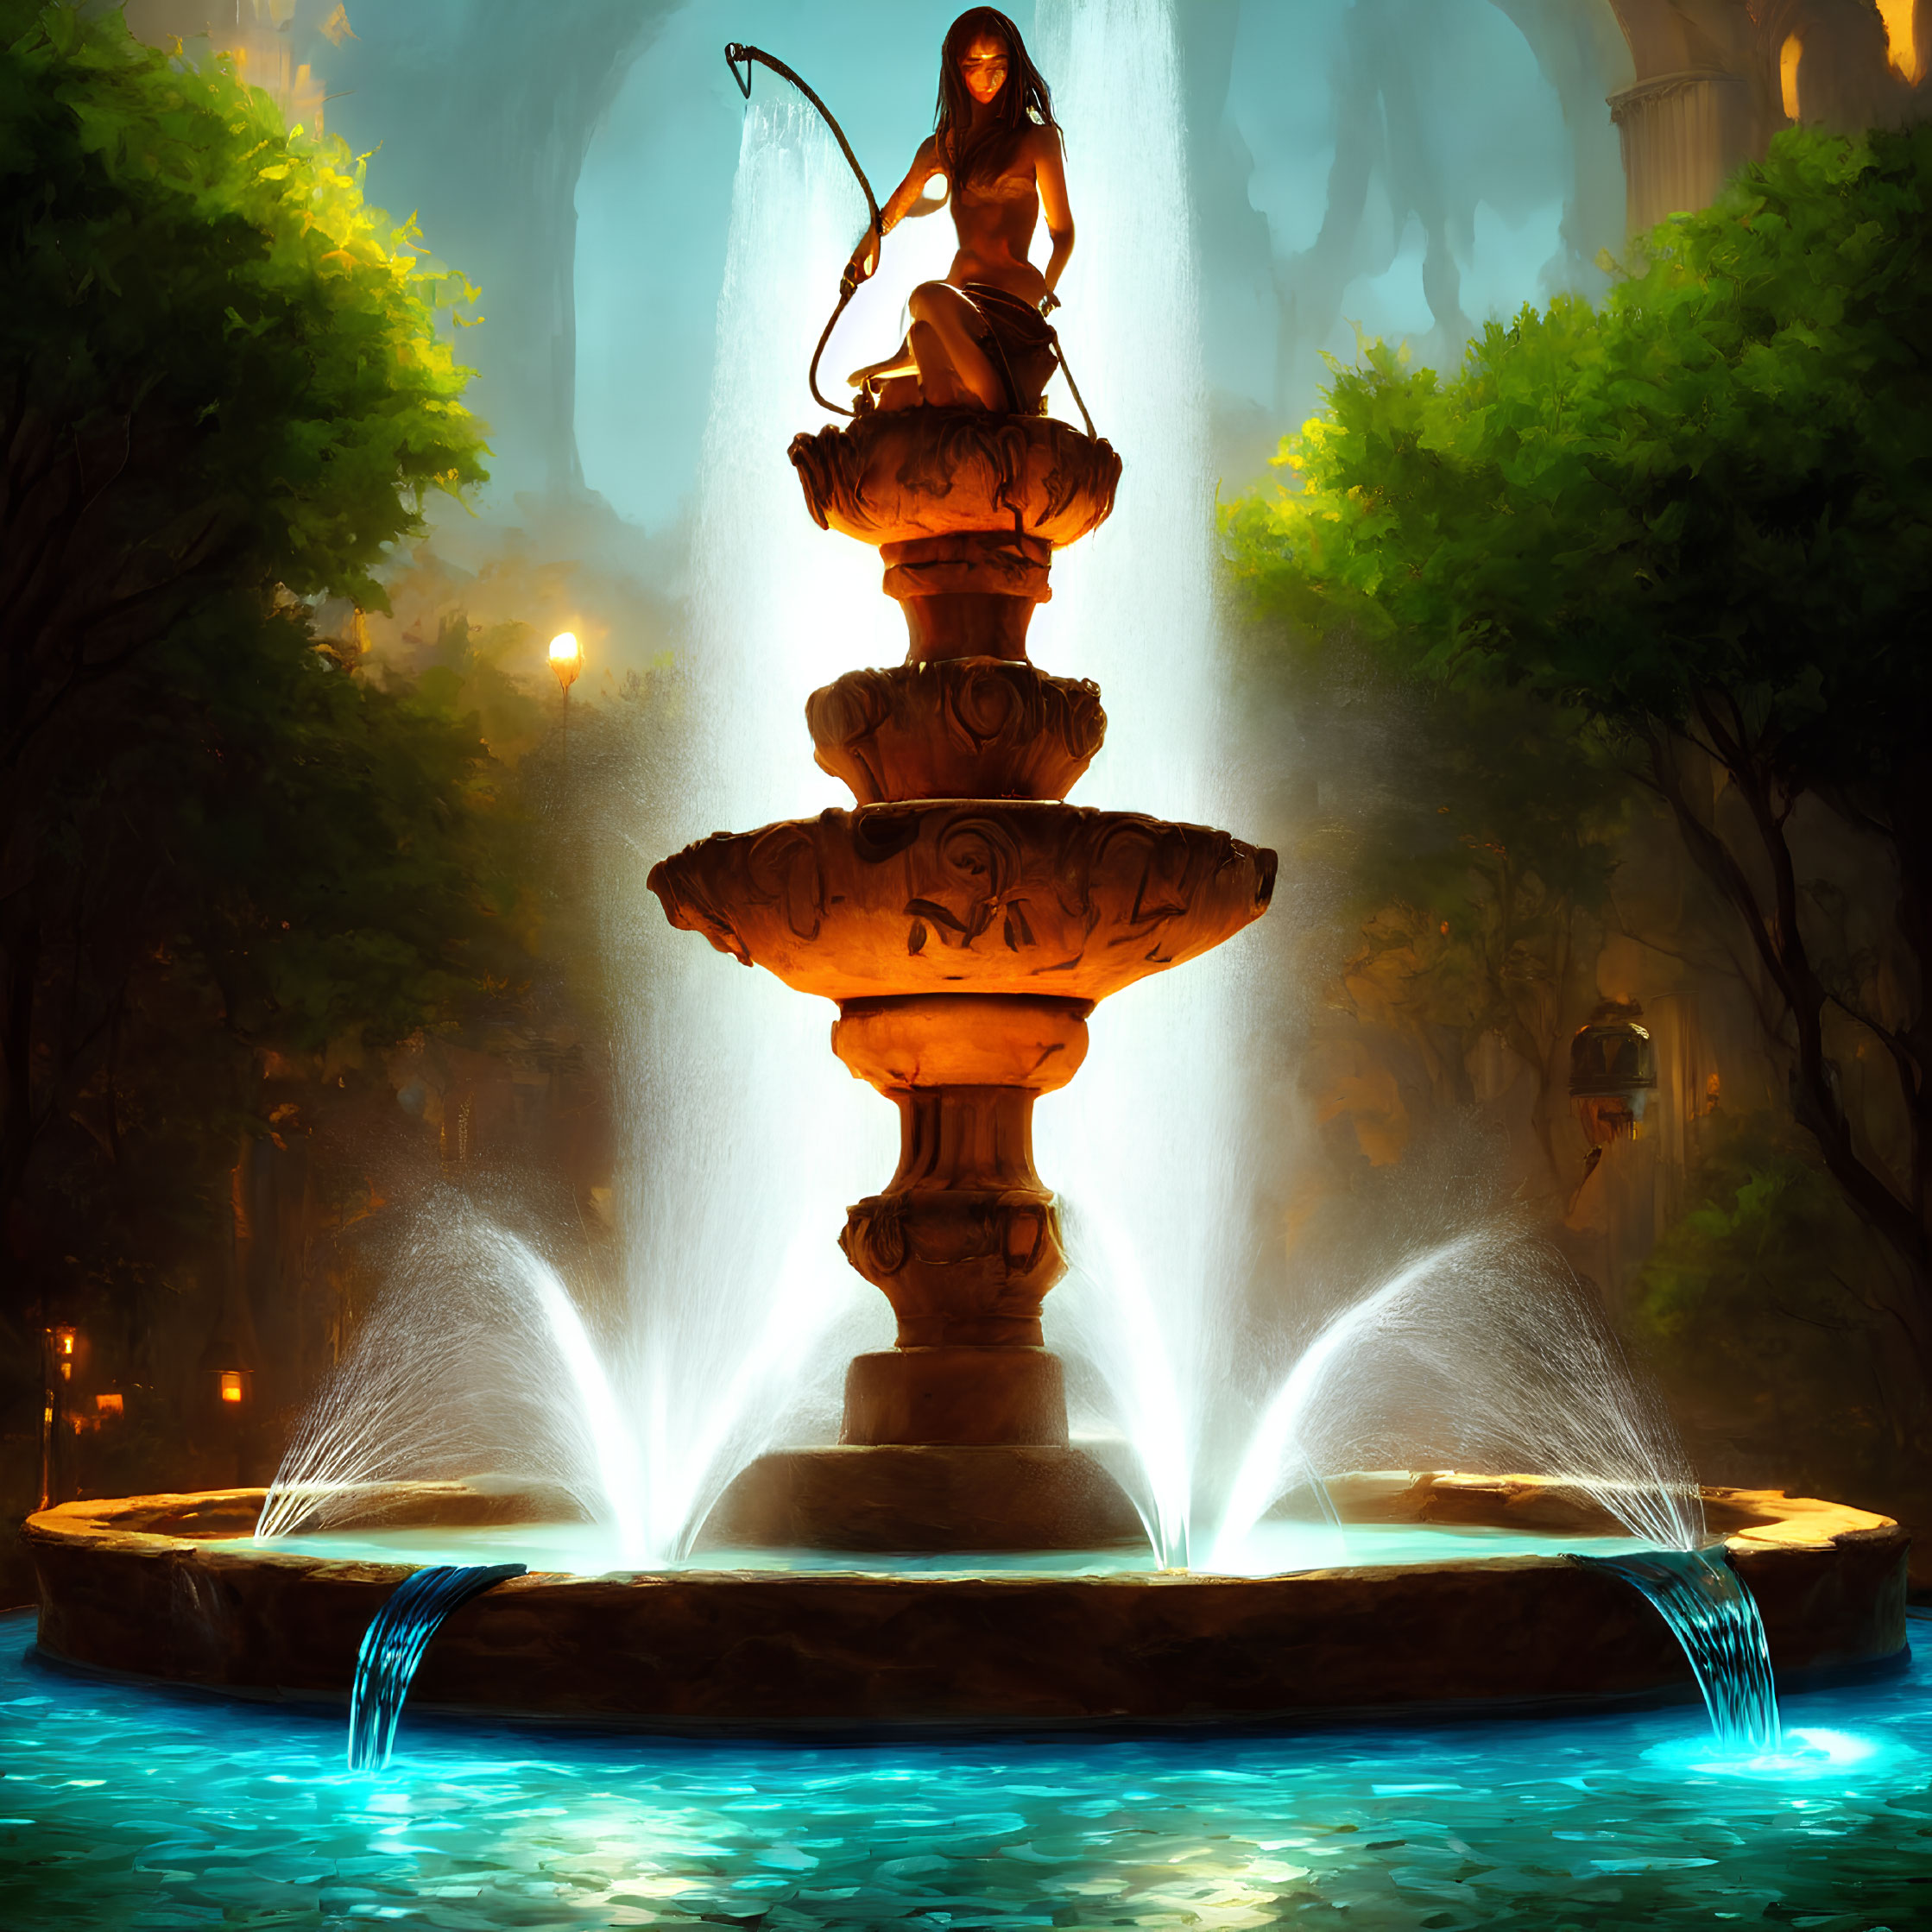 Nighttime scene of mystical fountain with figure and water jets